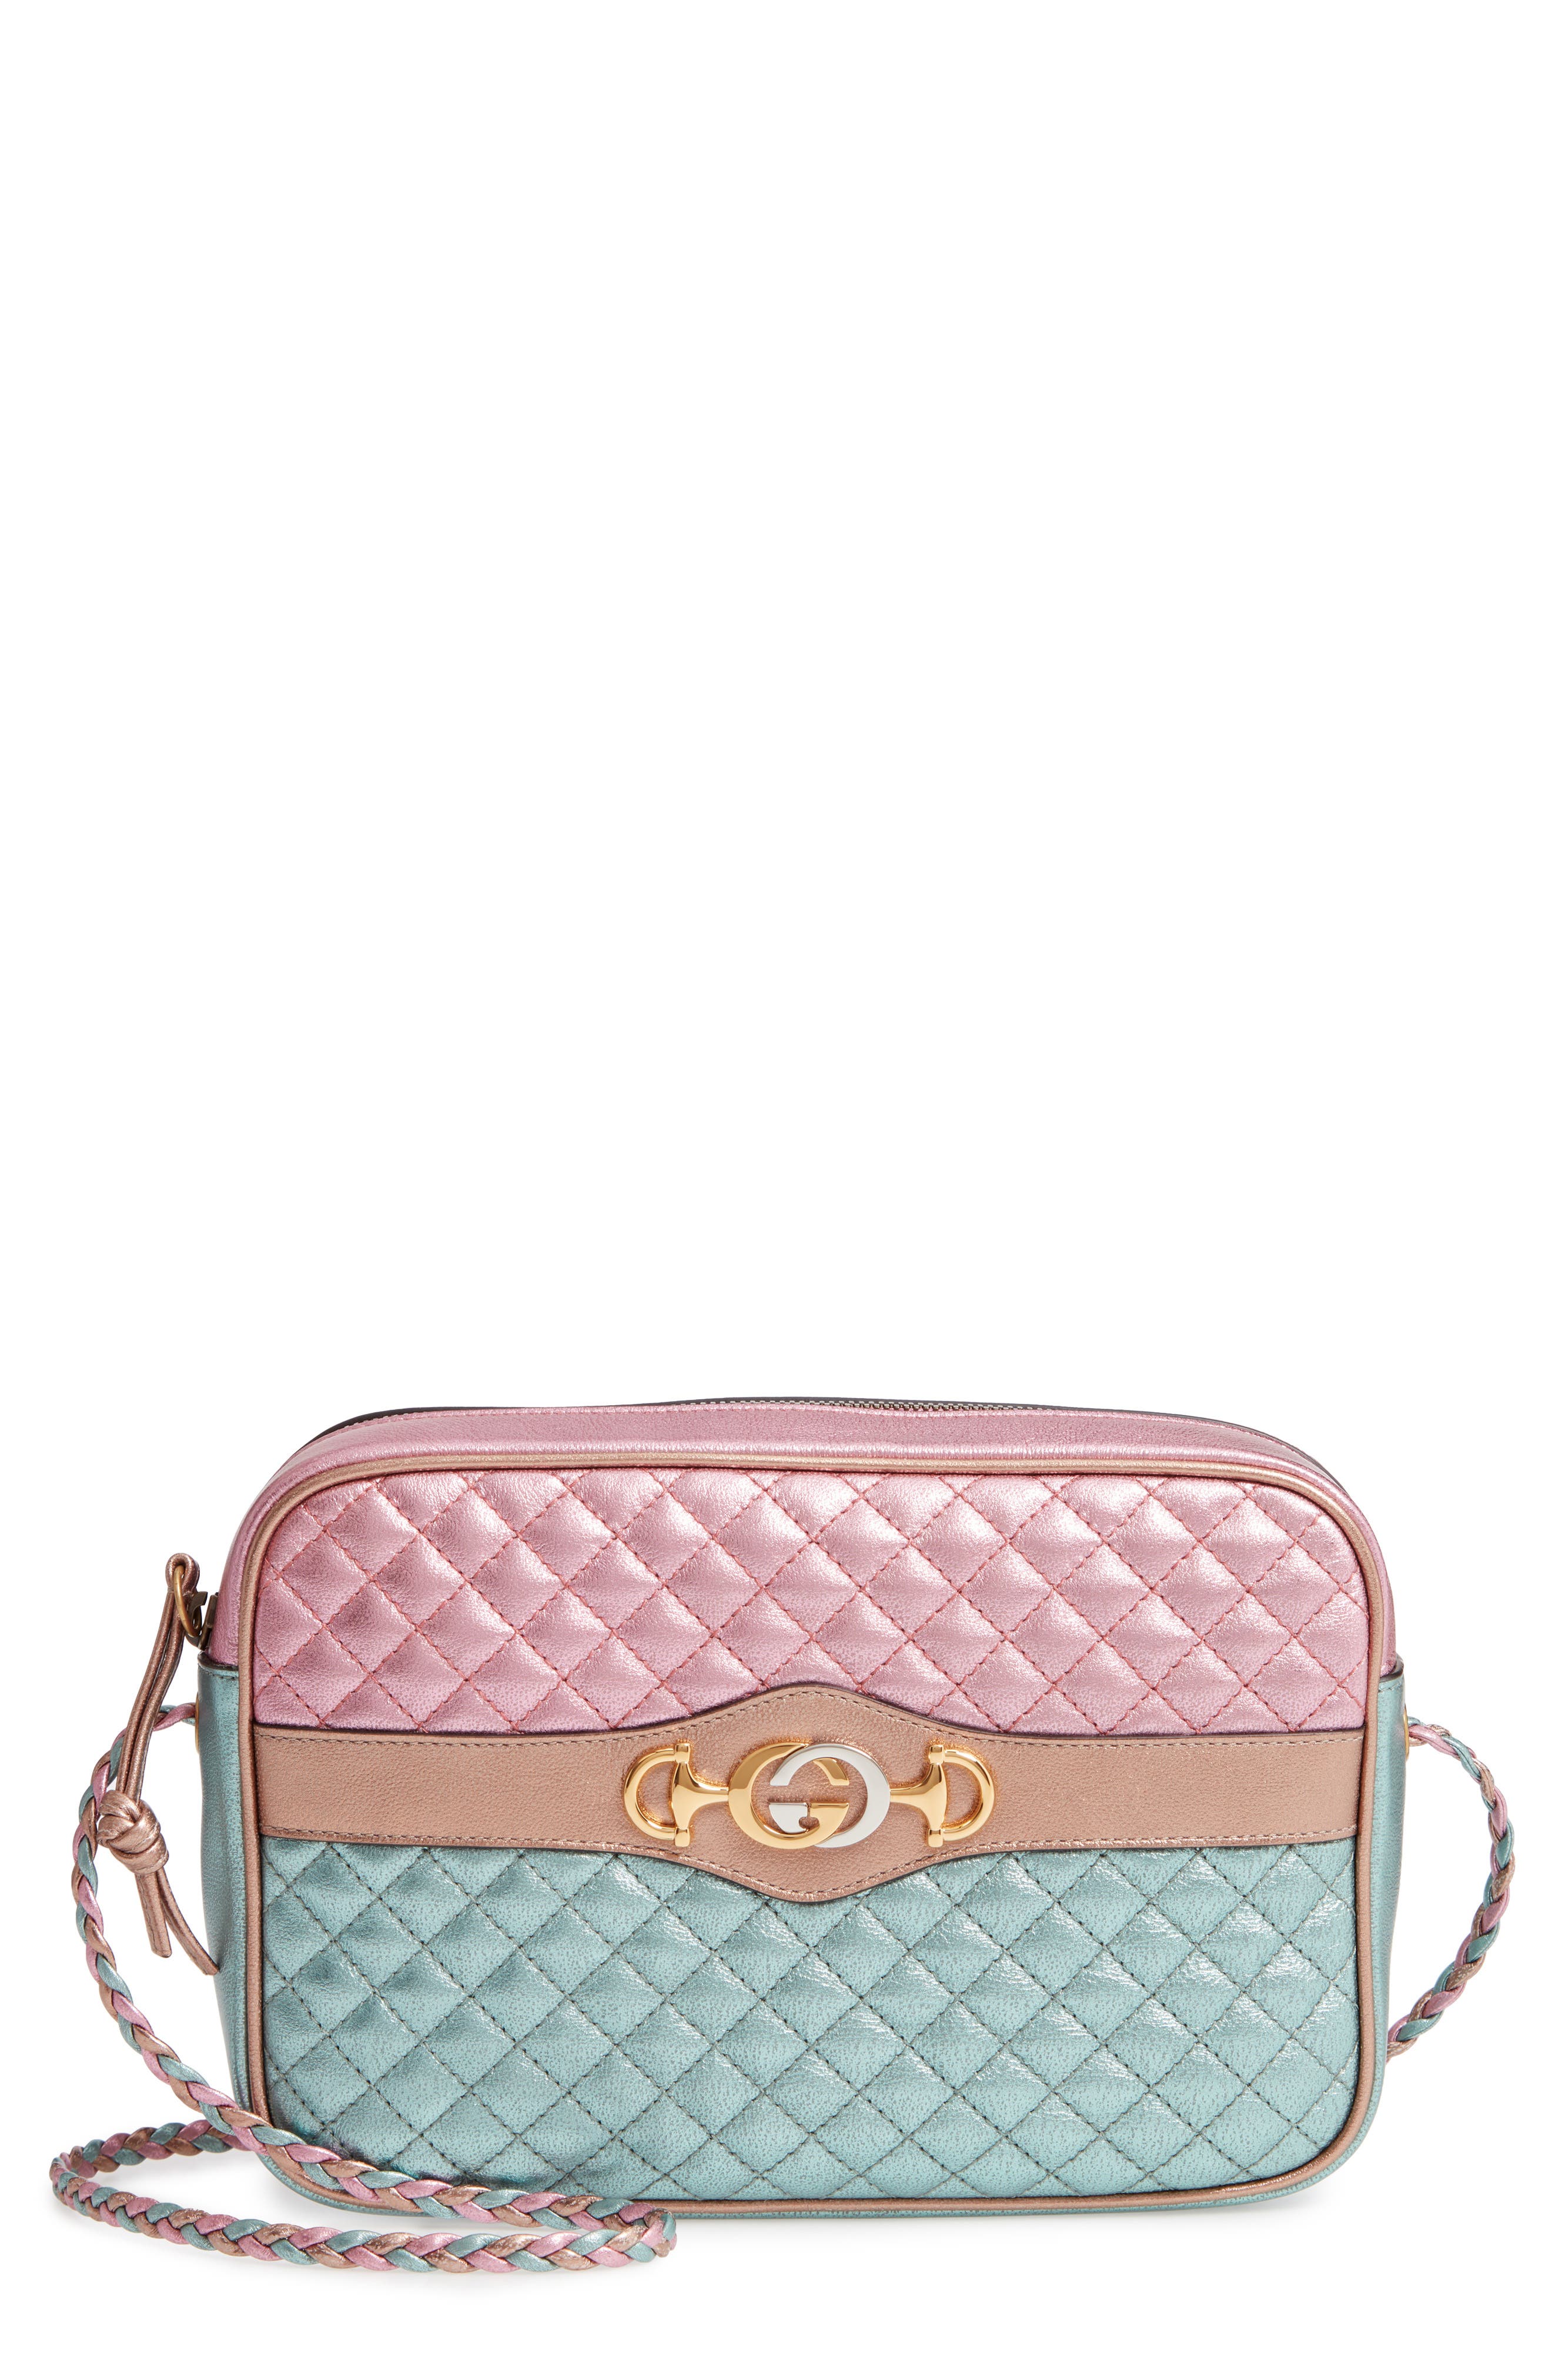 gucci small quilted leather shoulder bag